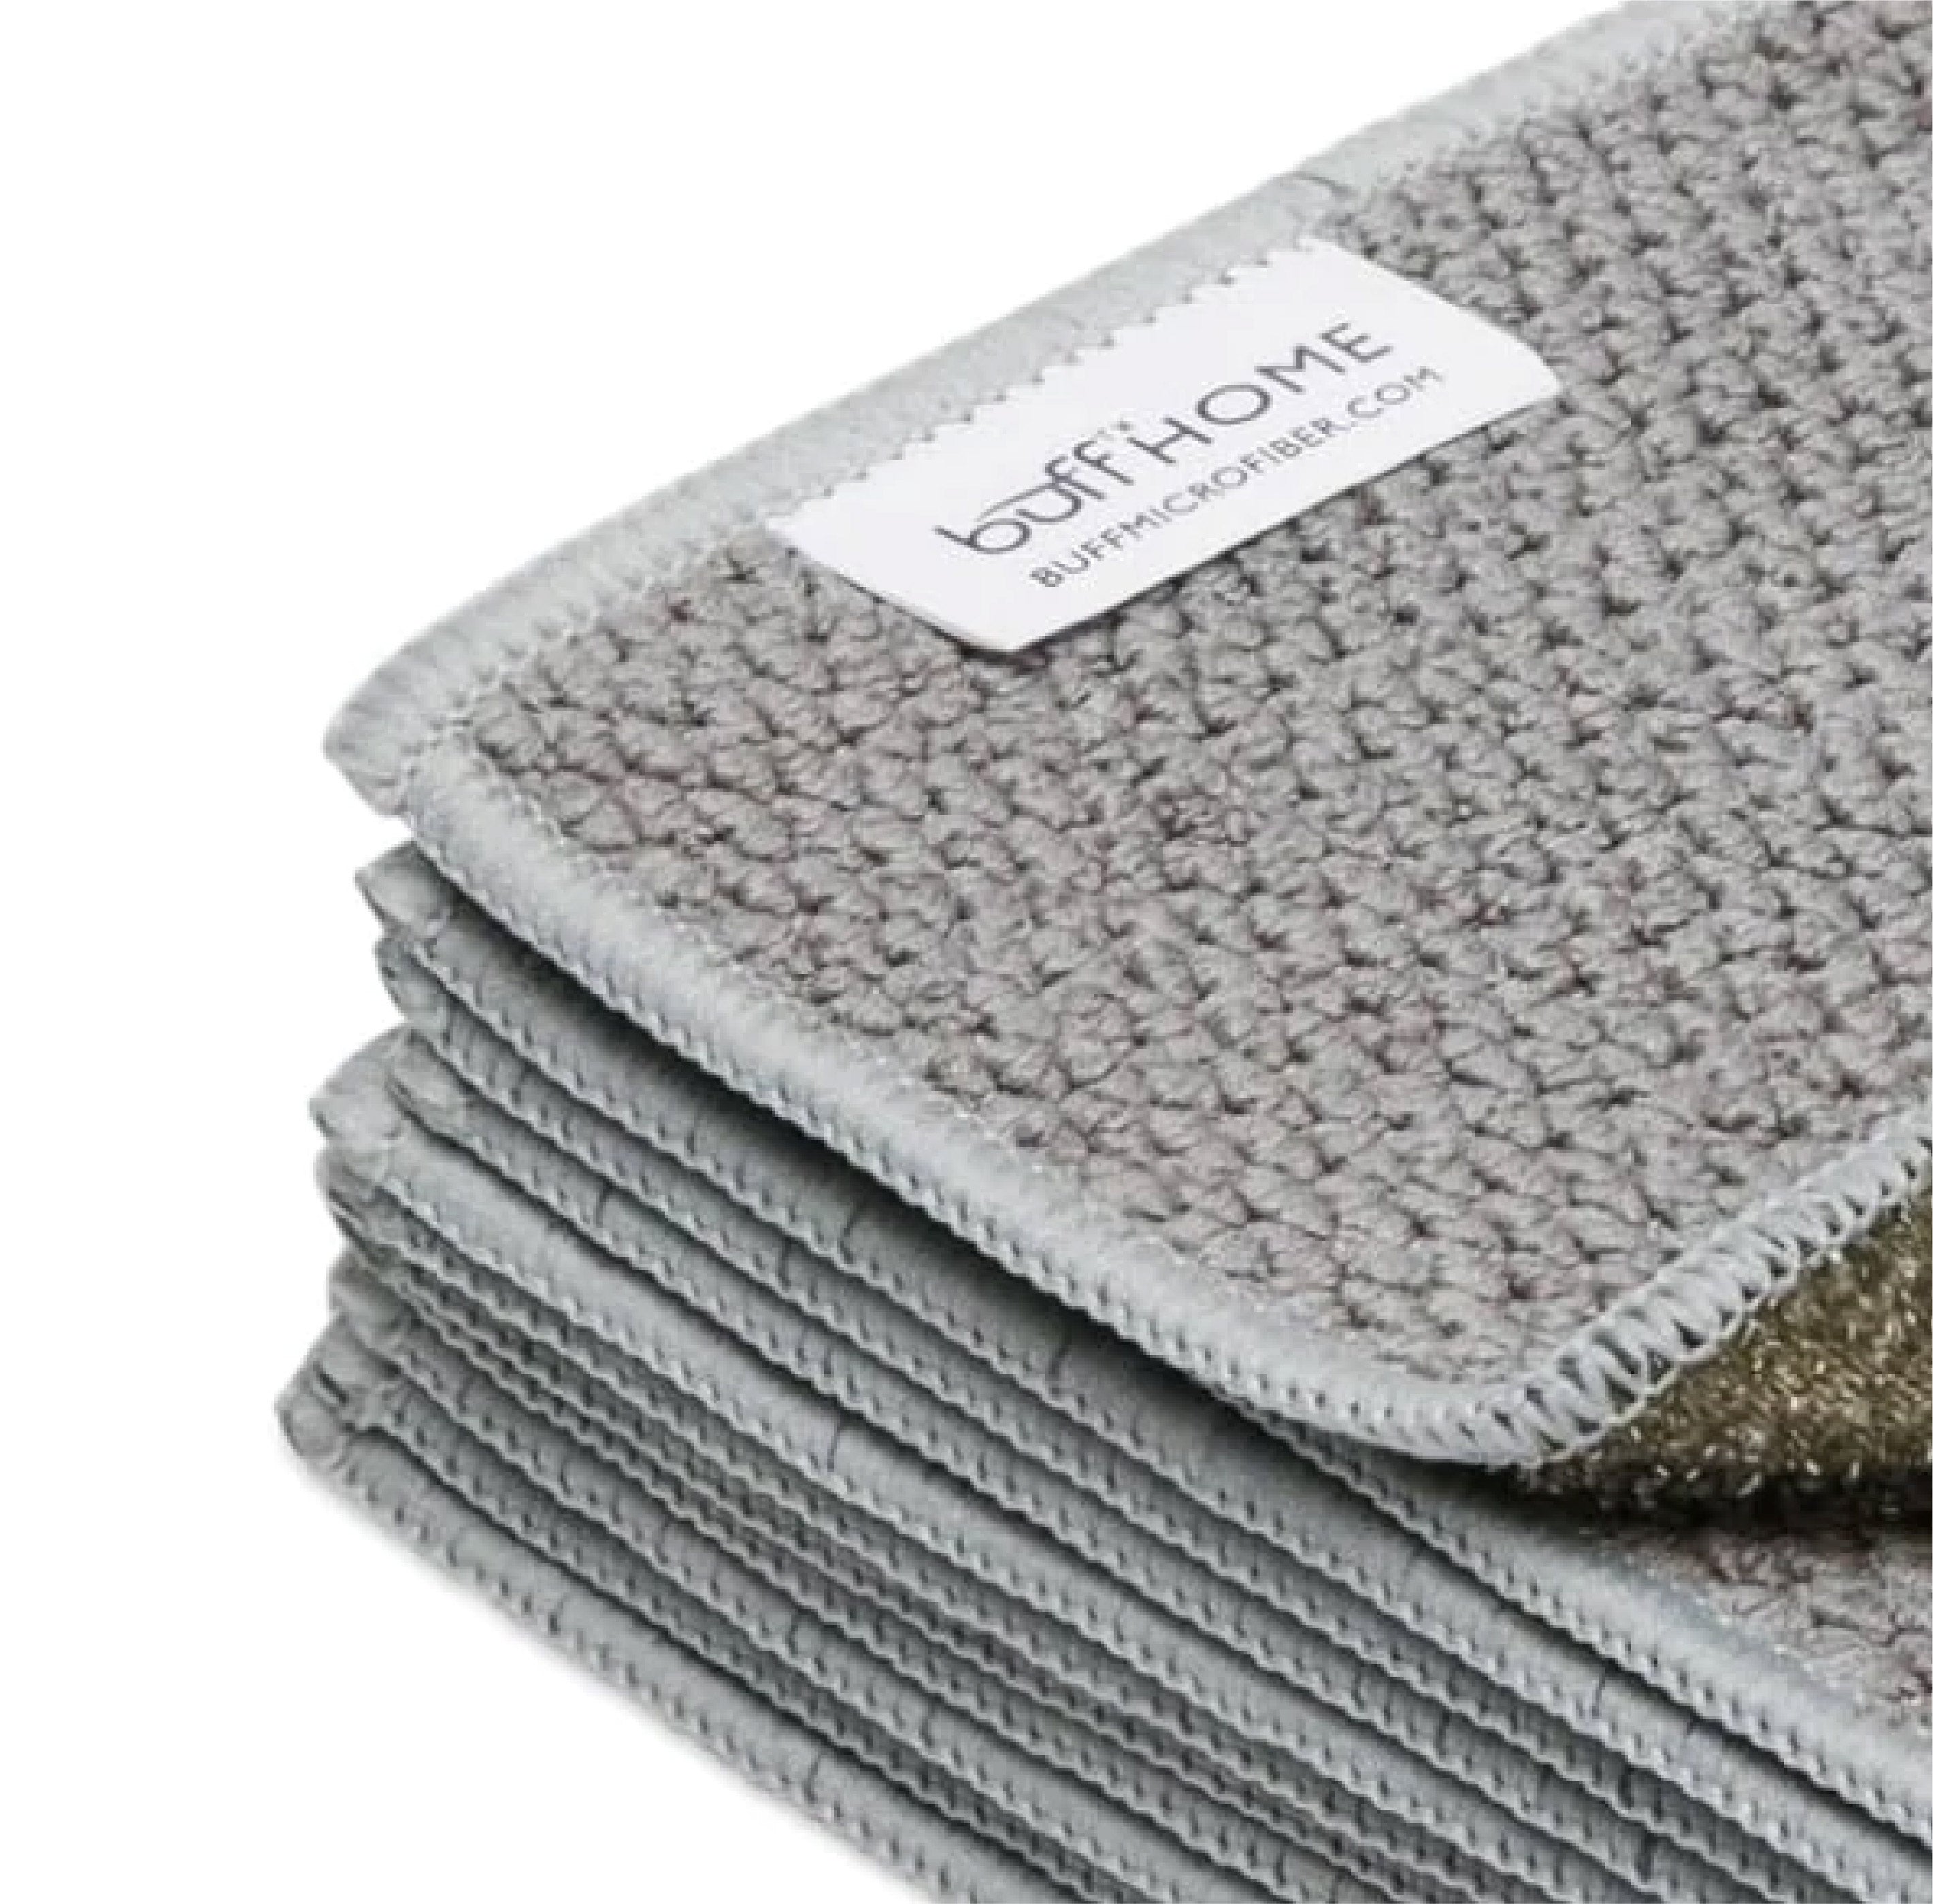 Microfiber Dish Cloths | Scrubs & Cleans: Dishes, Sinks, Counters, Stove  Tops | Easy Rinsing | Machine Washable | 6 Pack (Size 4 x 6 inches)